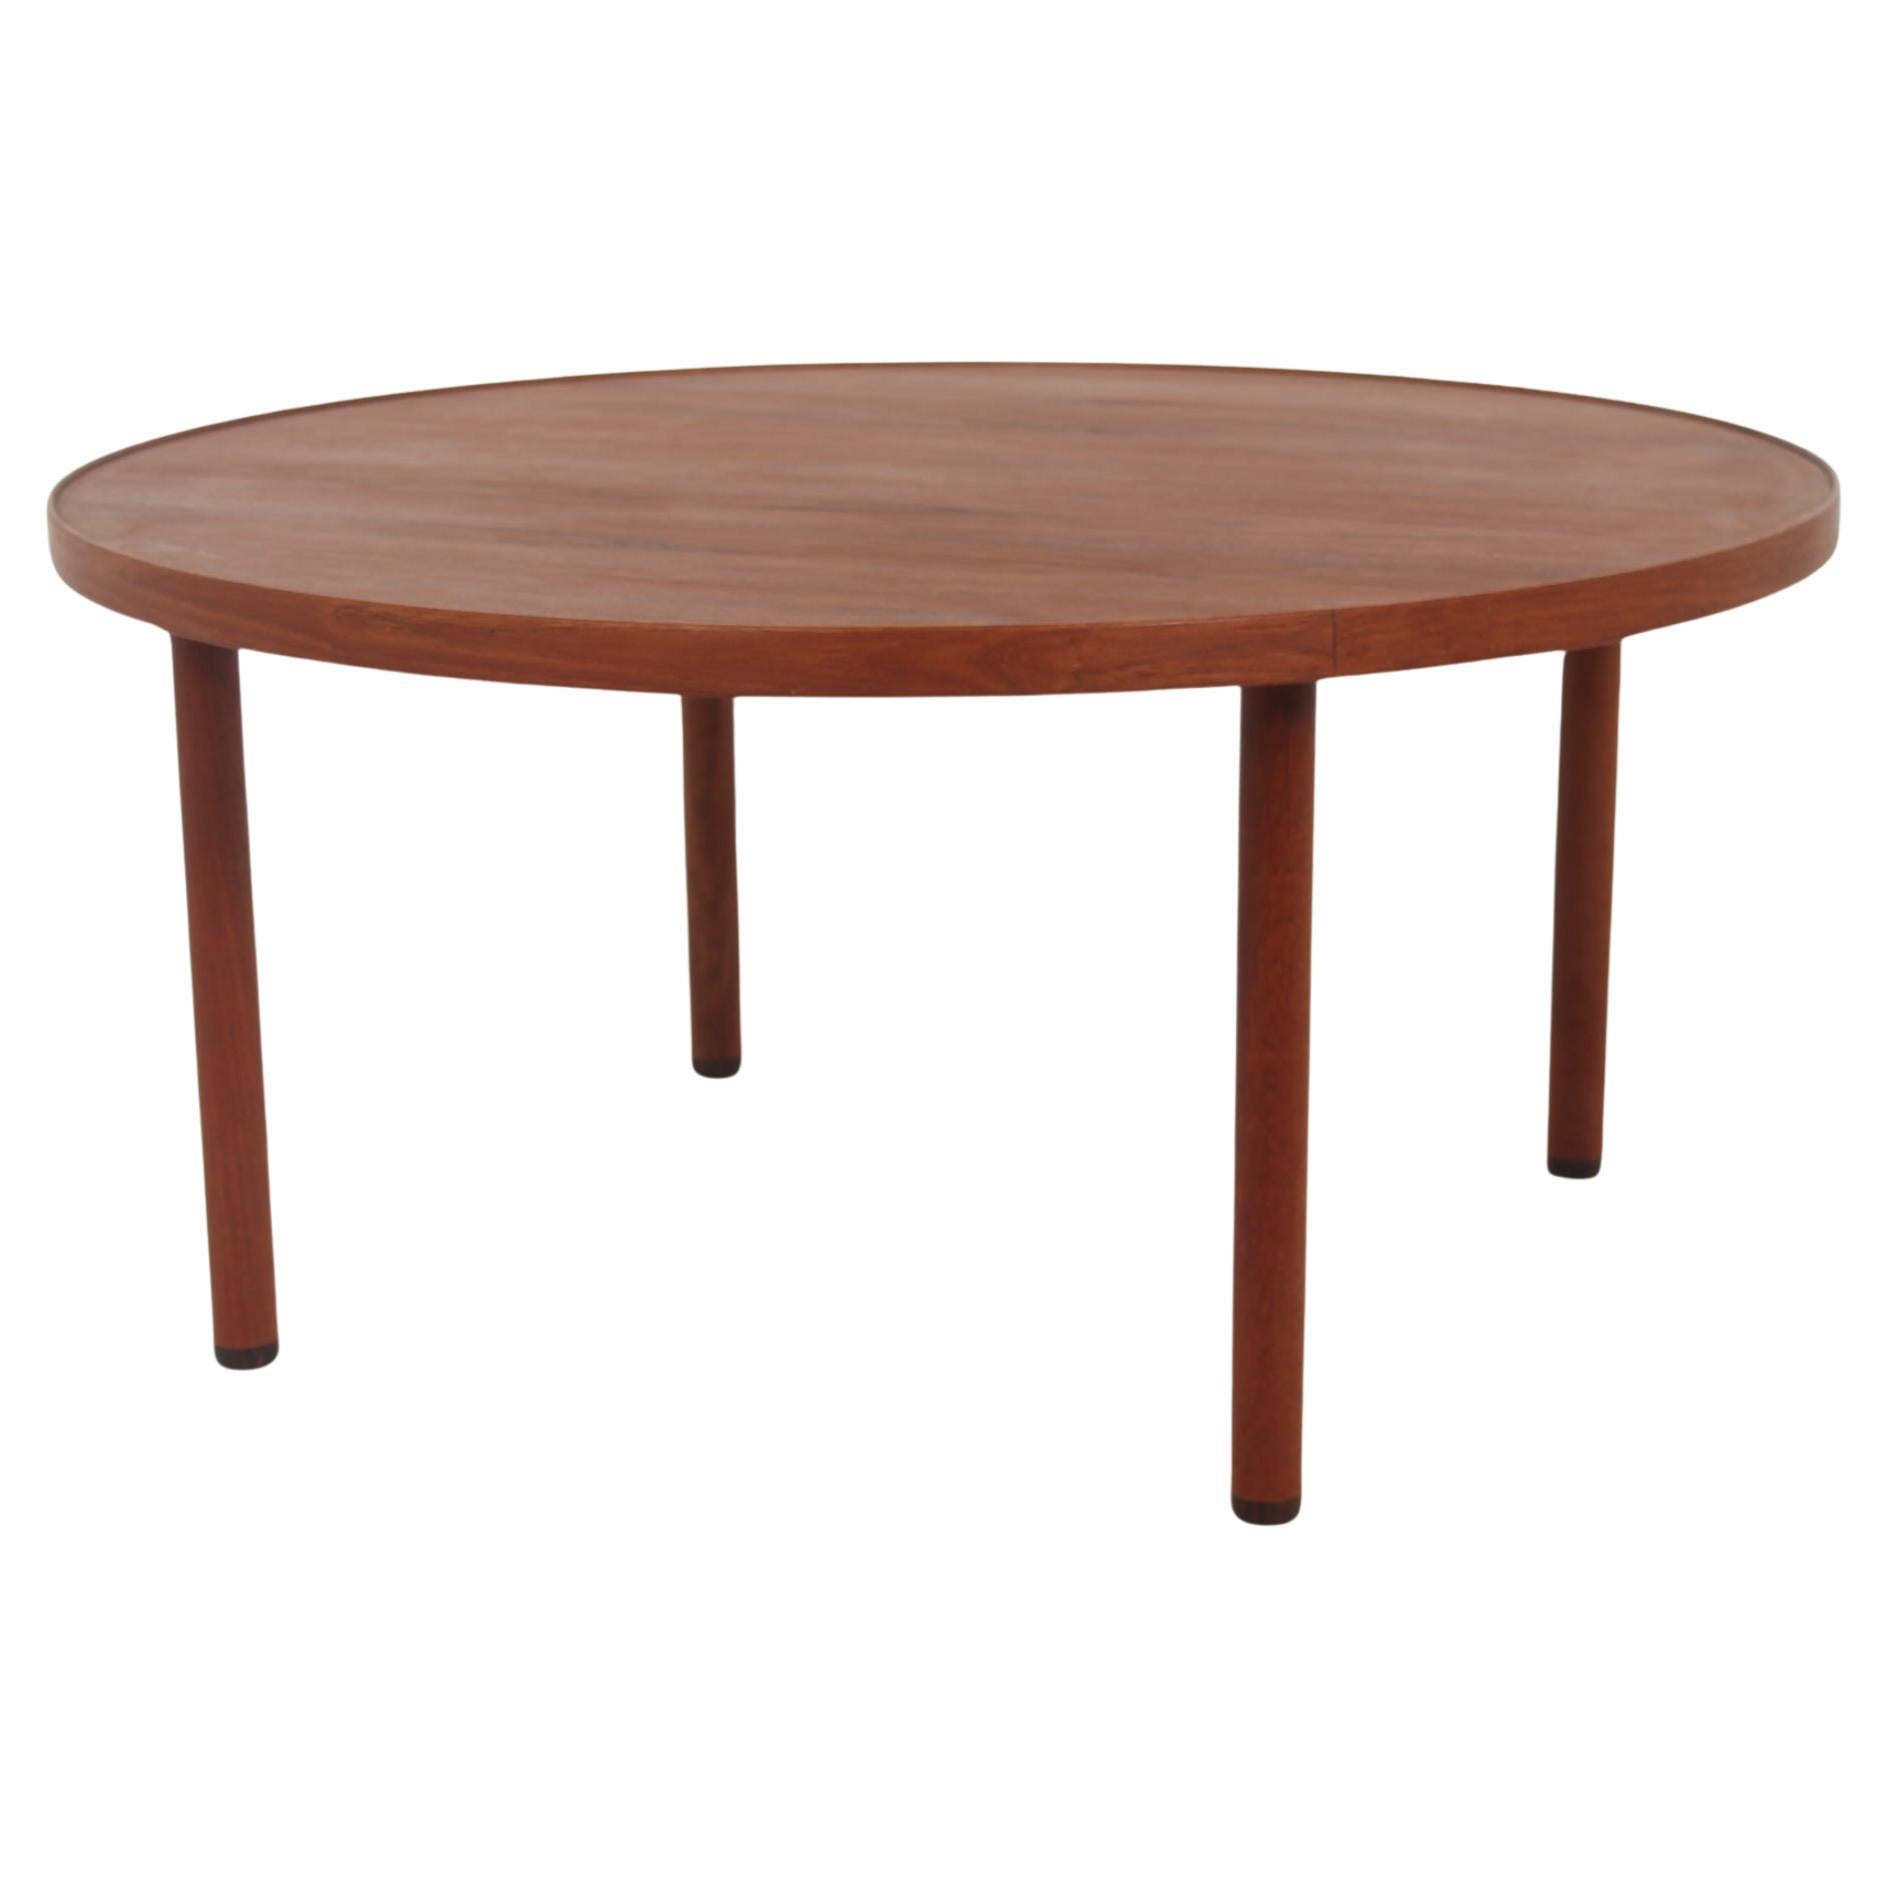 Original coffee table. Designed in the 1950s by E. Larsen and A. Bender Madsen. For Sale